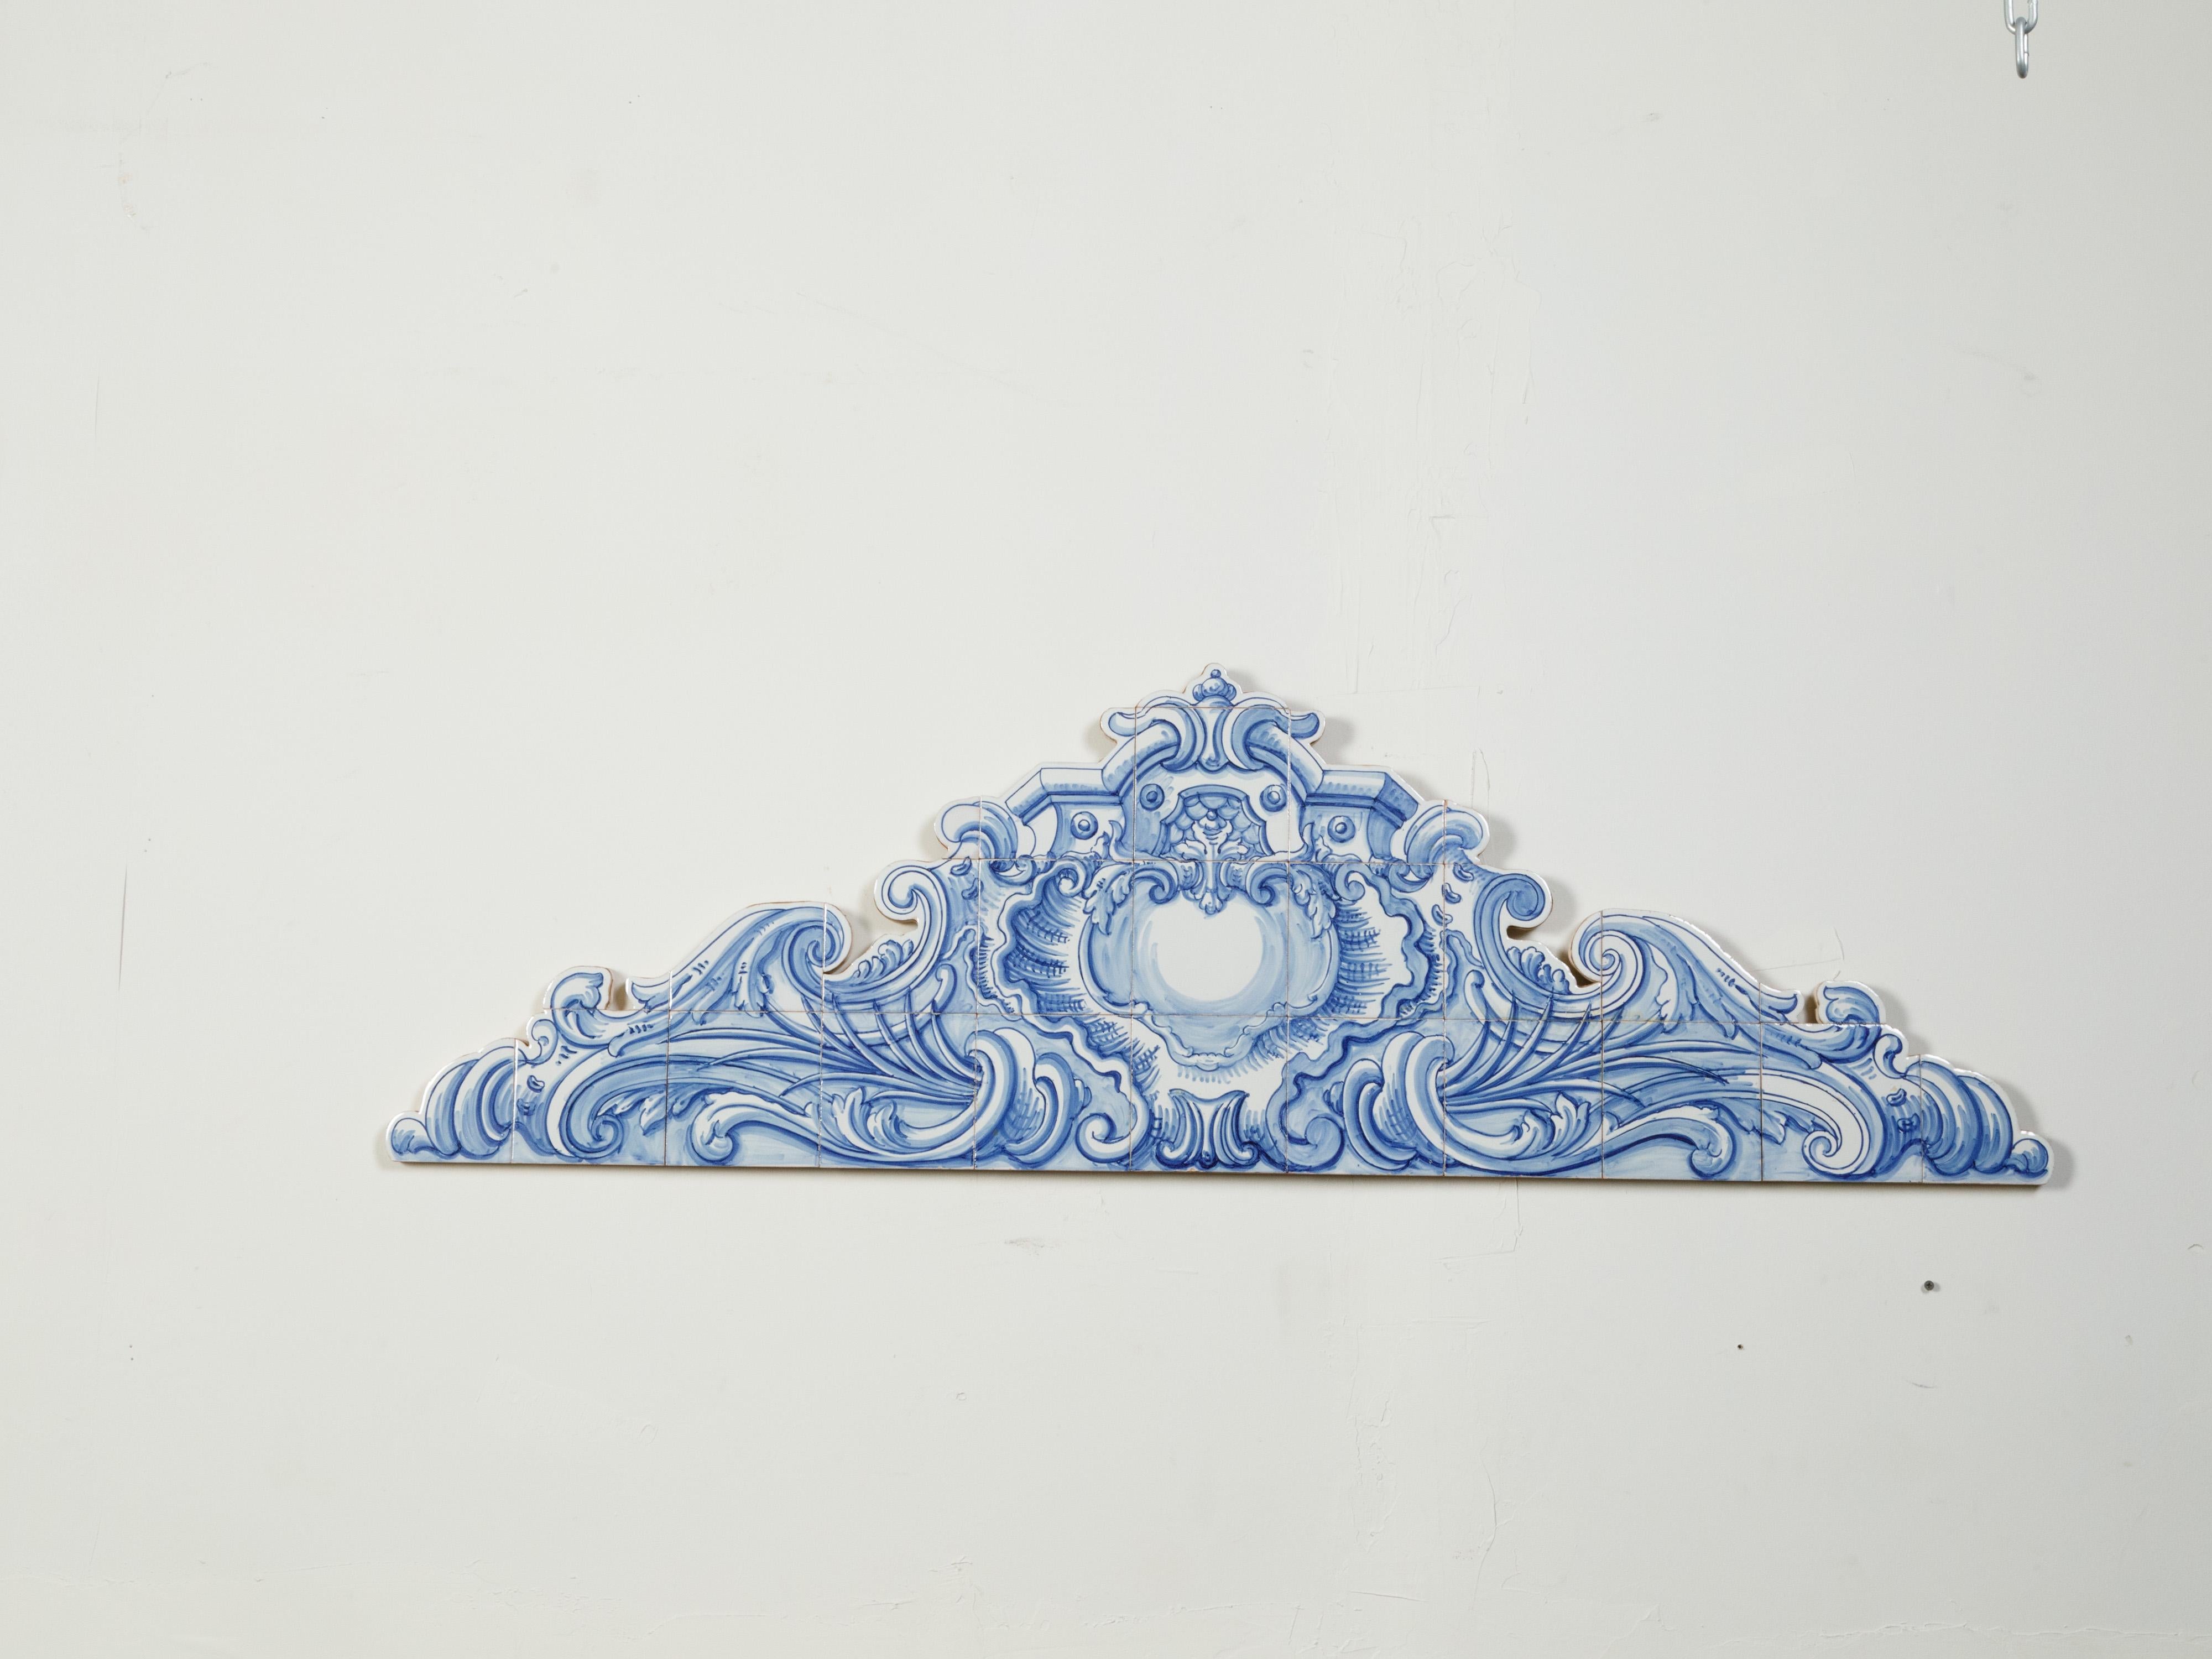 A Dutch architectural wall fragment from the 20th century, with blue and white Delft tiles mounted on wood. Created in the Netherlands, this architectural fragment features a blue and white Delft Rococo style pediment adorned with elegant scrolls